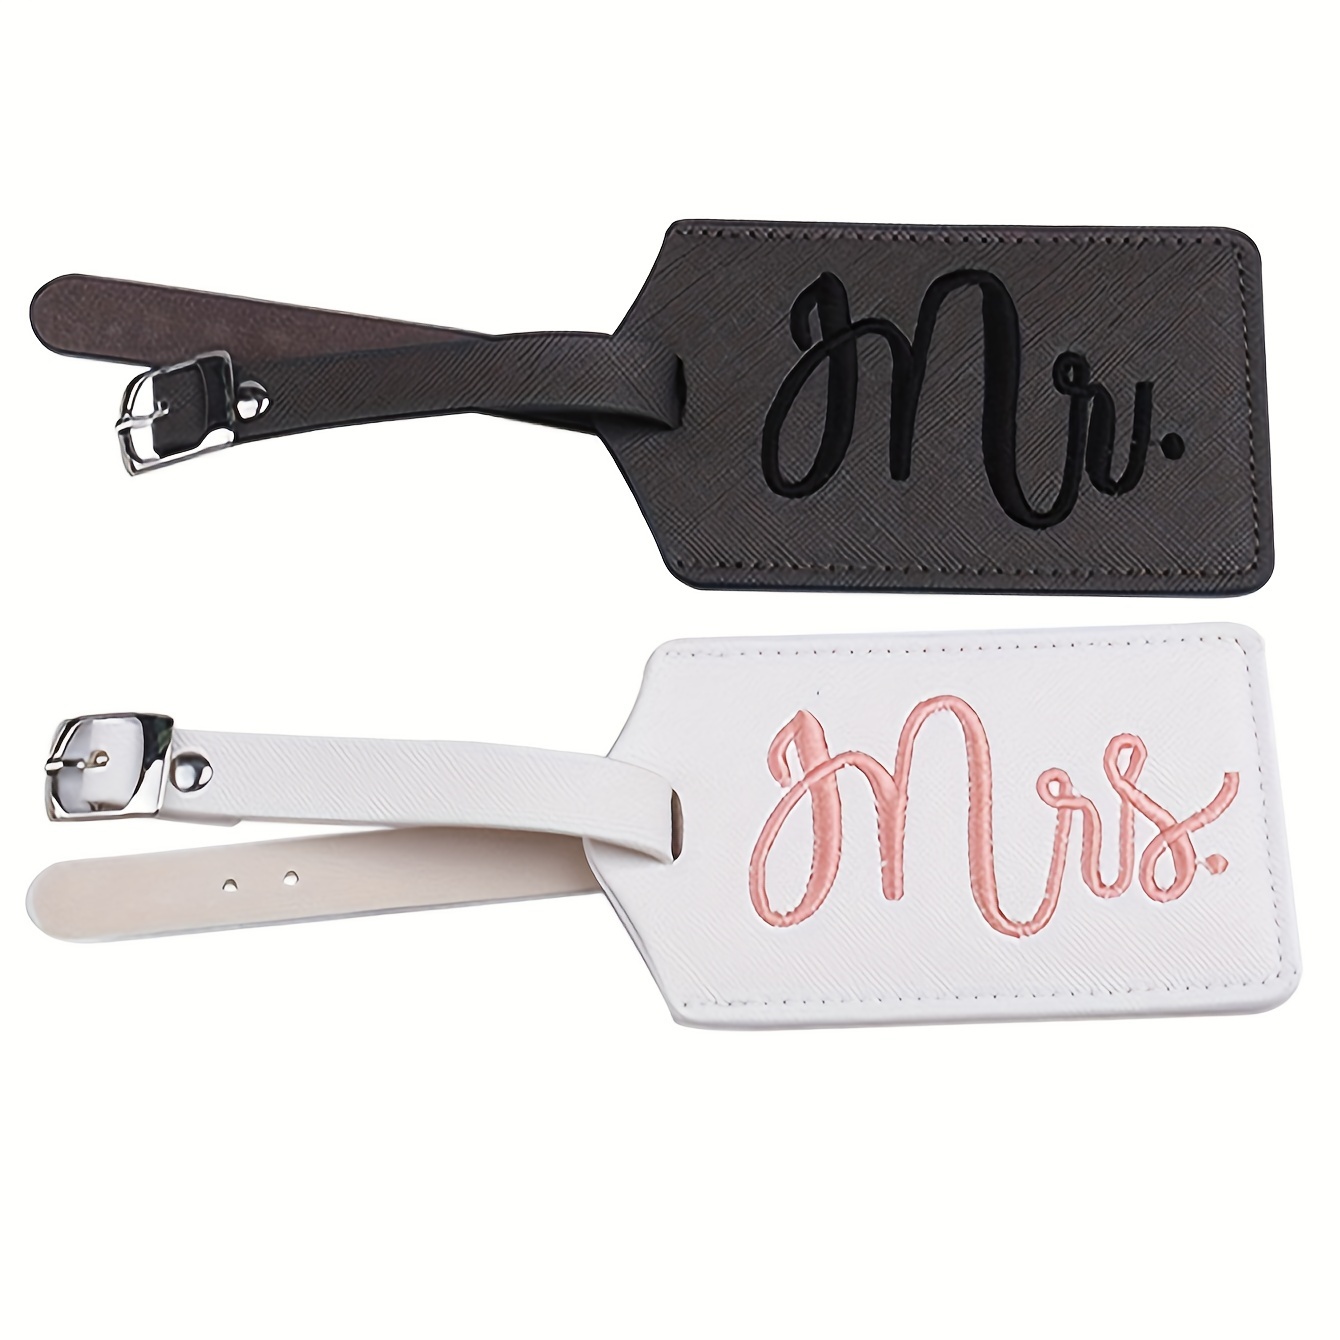 

2pcs Embroidered Mr. Mrs. Pattern Luggage Tag, Identifier And Name Tag For Travel Suitcases And Bags, With Privacy Cover, For Couple's Honeymoon